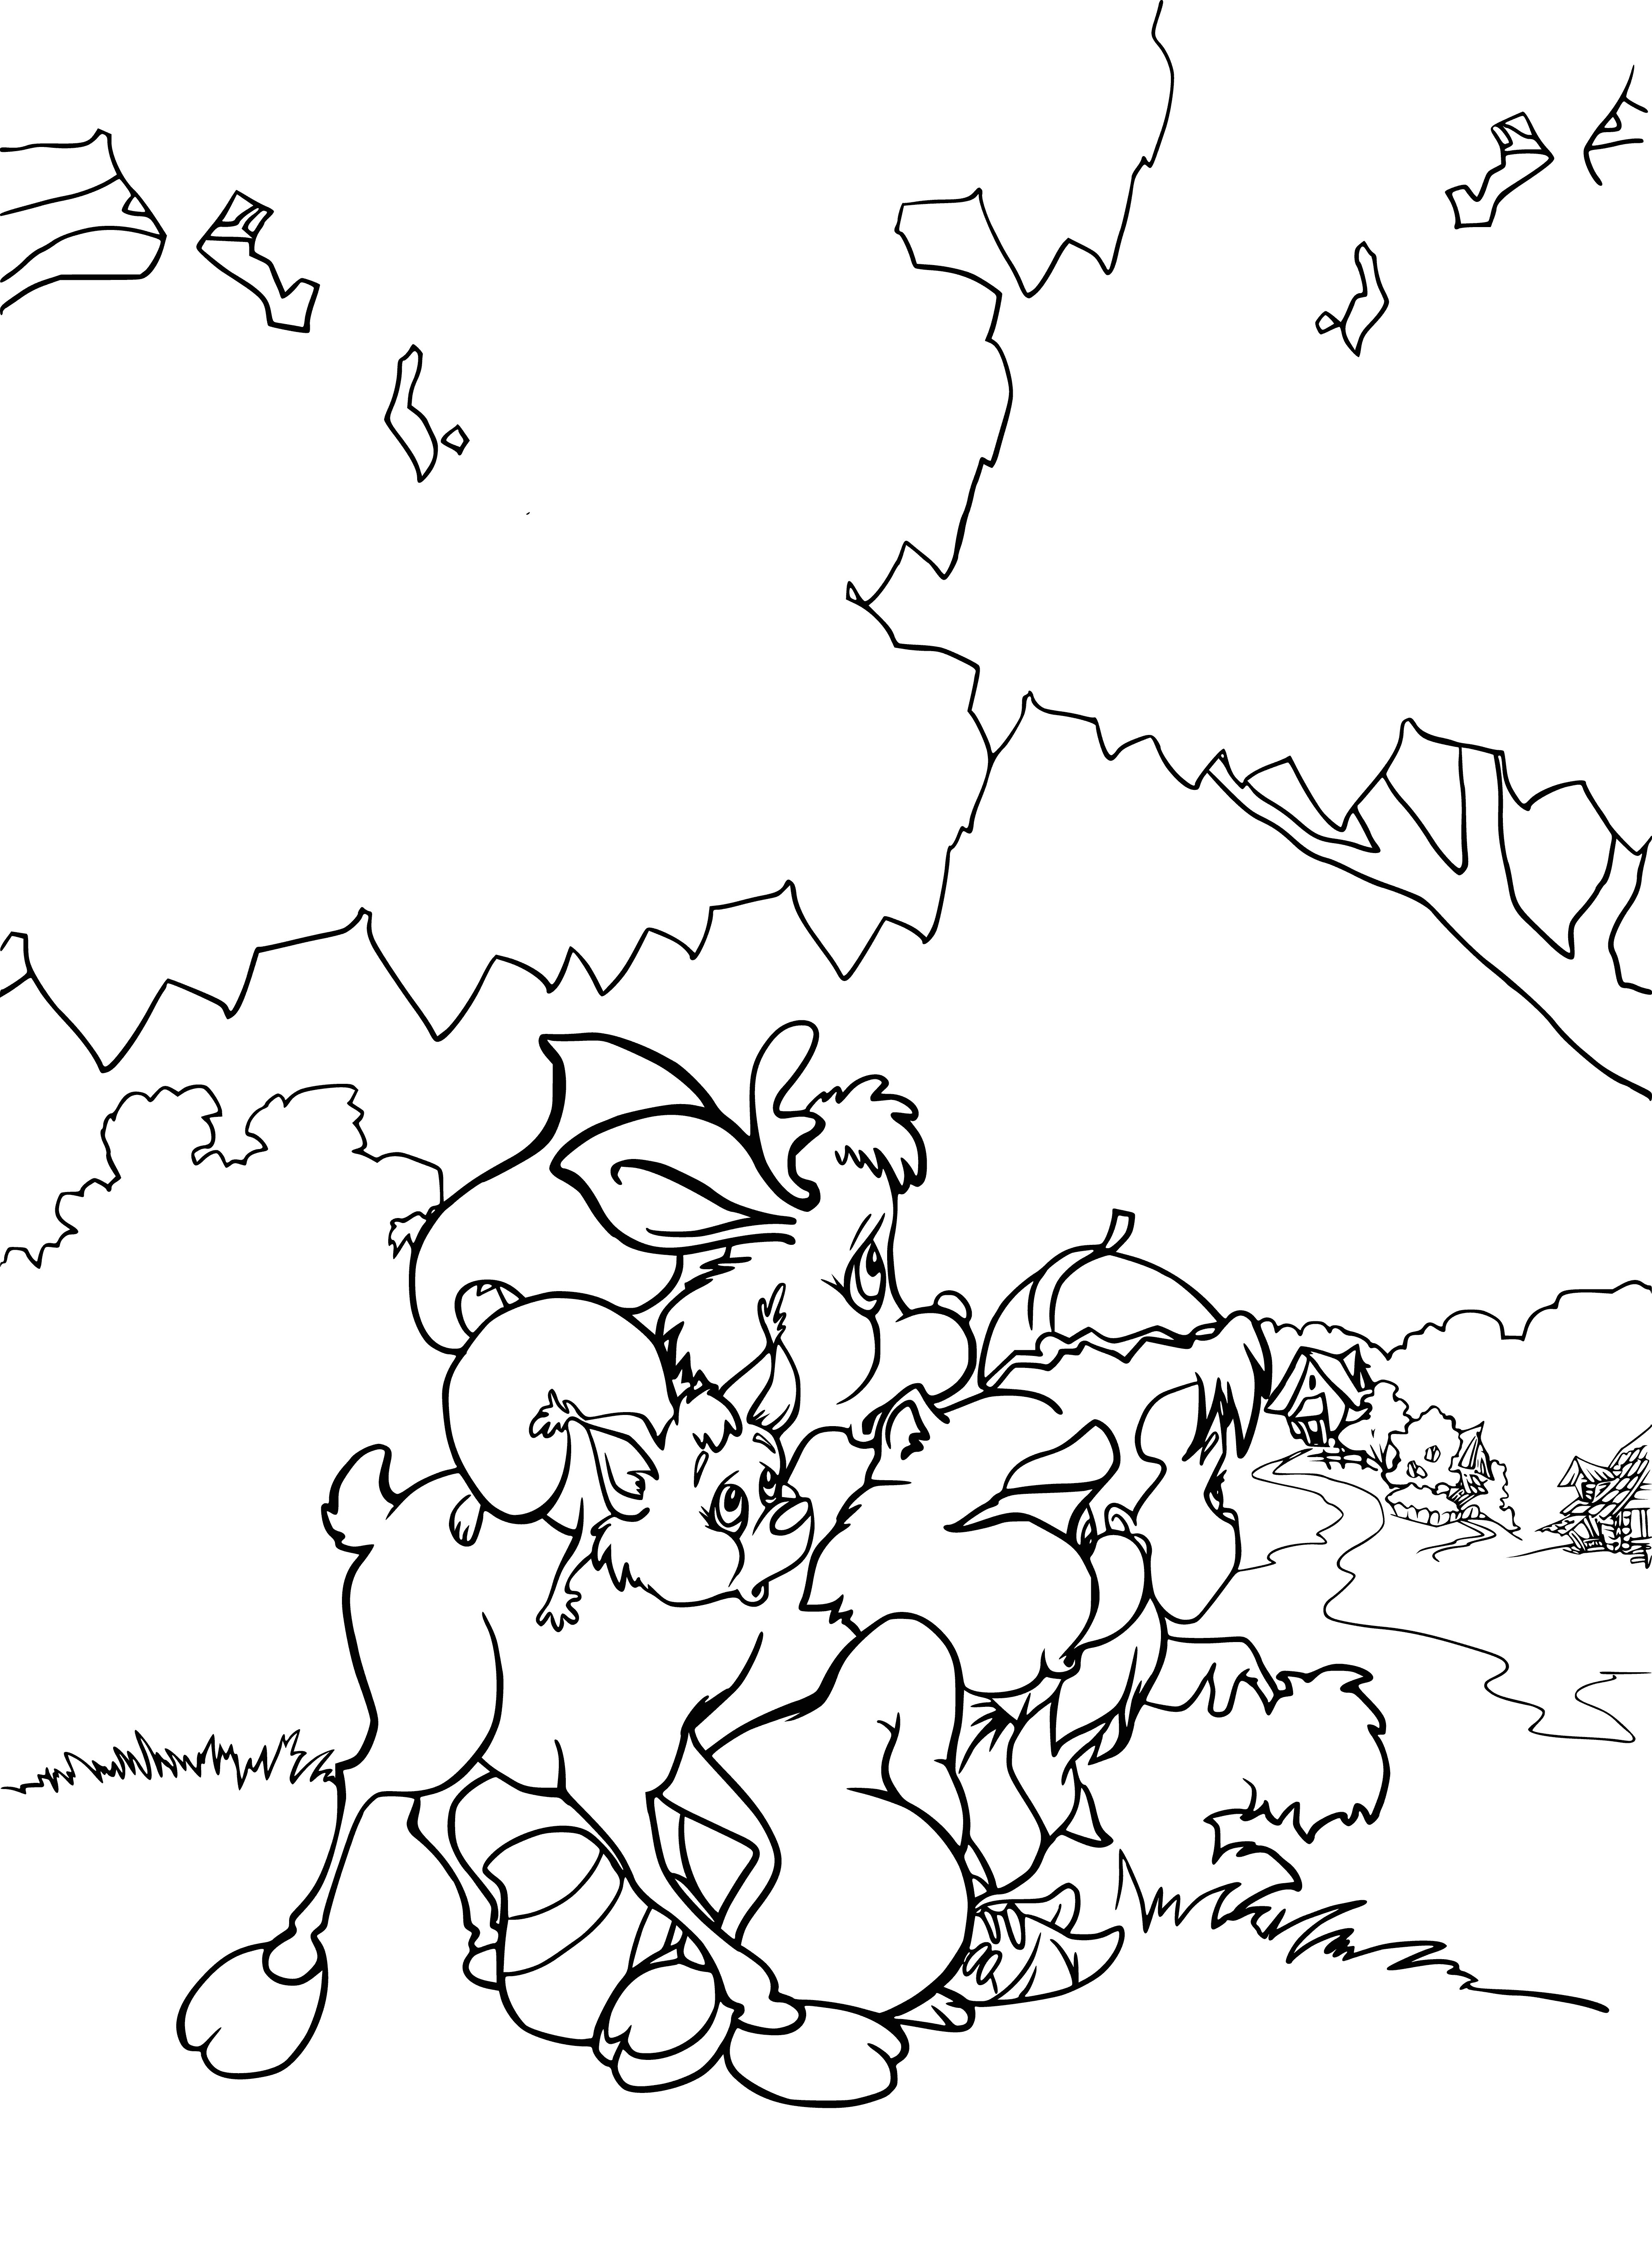 coloring page: Kids playing in a village surrounded by a forest: Oreshenka in red & friends in blue, running and having fun with a ball.